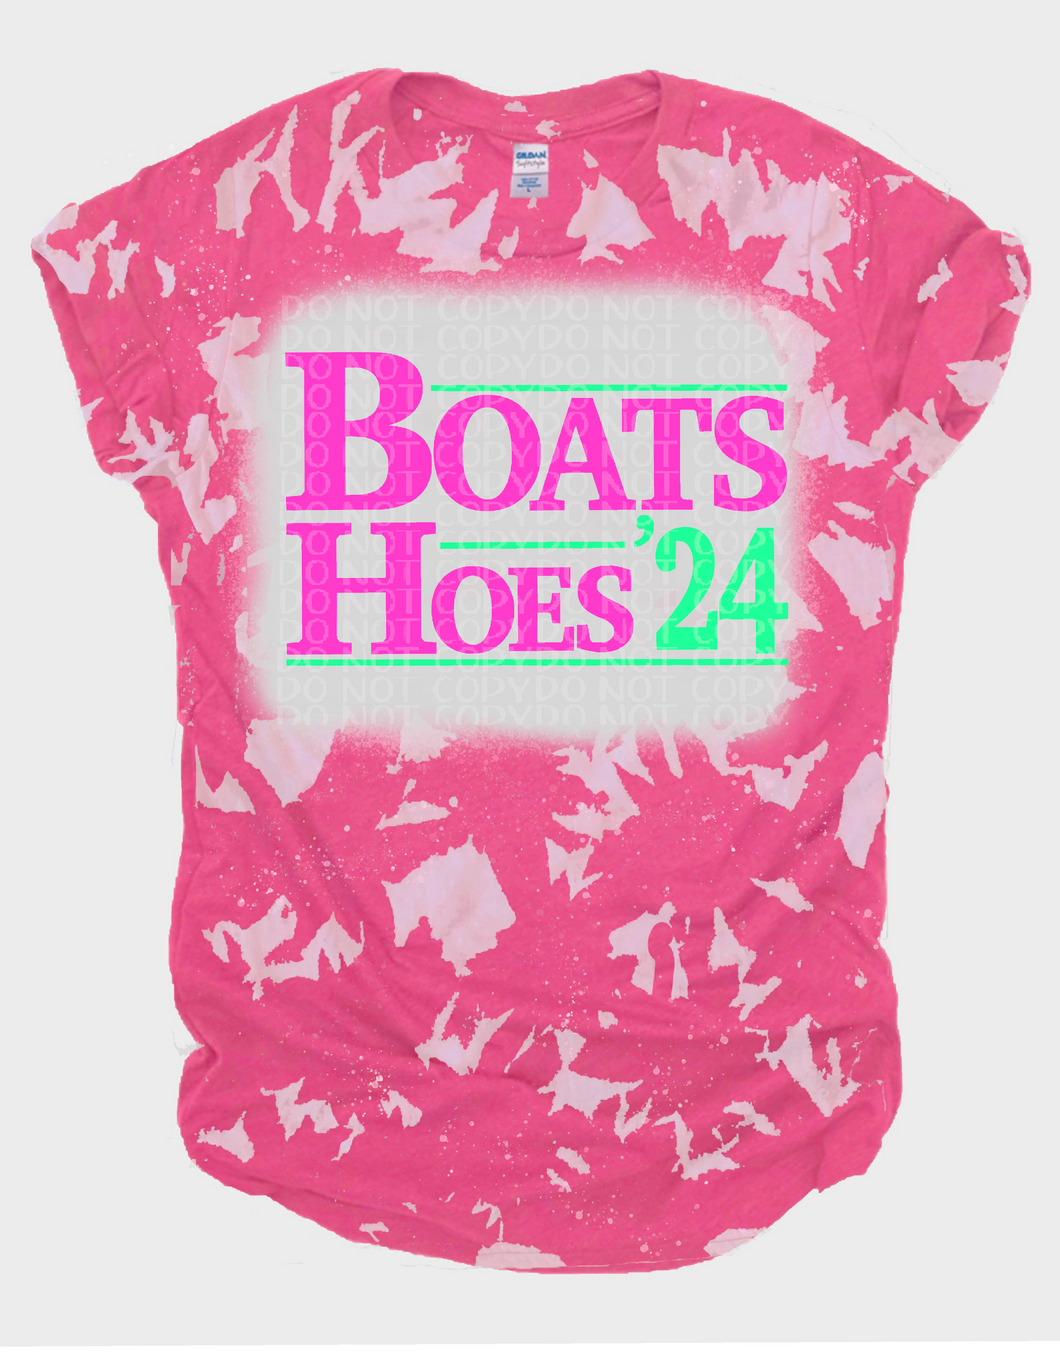 Boats & Hoes ‘24 Bleached Tee